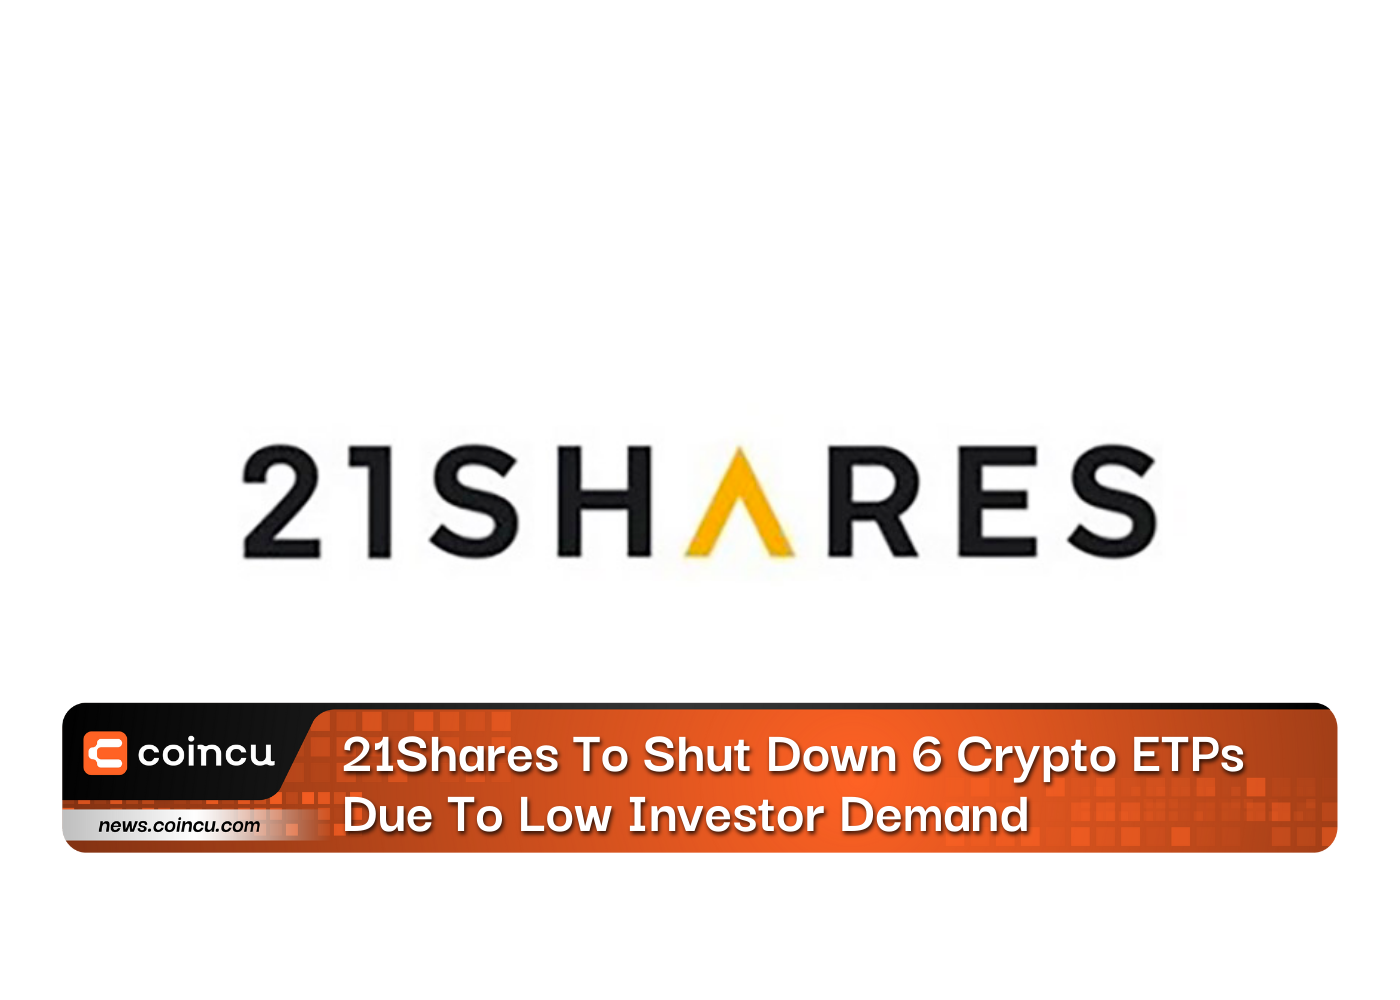 21Shares To Shut Down 6 Crypto ETPs Due To Low Investor Demand